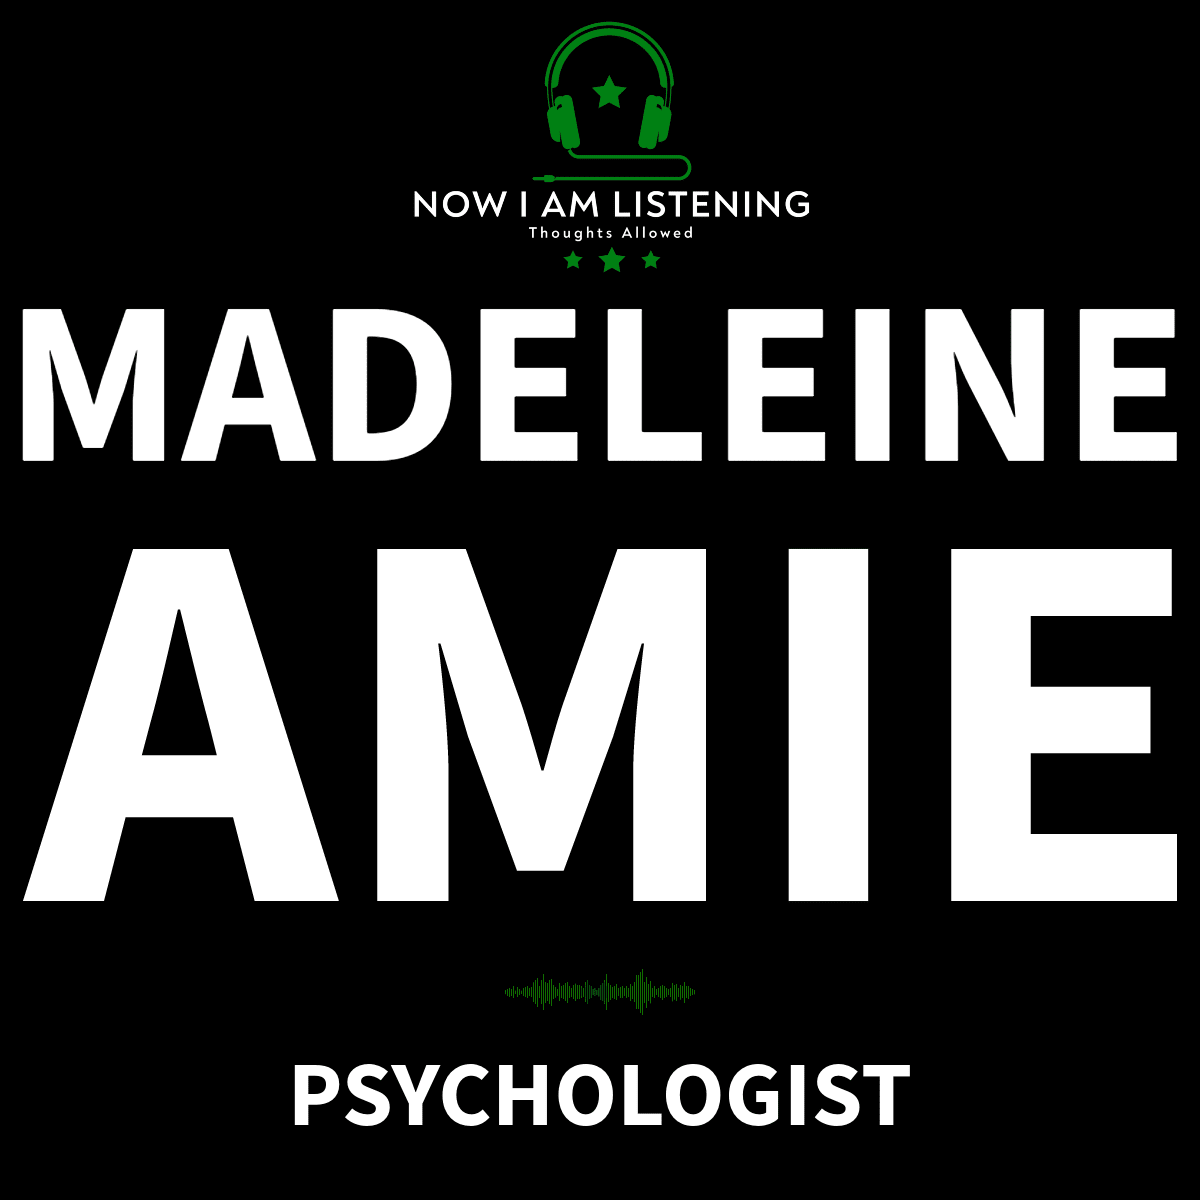 Andrew Johnson and with me today is psychologist Dr Madeleine Amie. In this episode, we explore the inner workings of the human mind and how Dr Madeleine’s unique childhood growing up in a cult has shape the work she does today. We look at why we all do the things we do and learn more about what is a thought, what is a feeling and where do they actually exist inside our head. This episode really does look at how our thinking becomes our reality today and in the future.